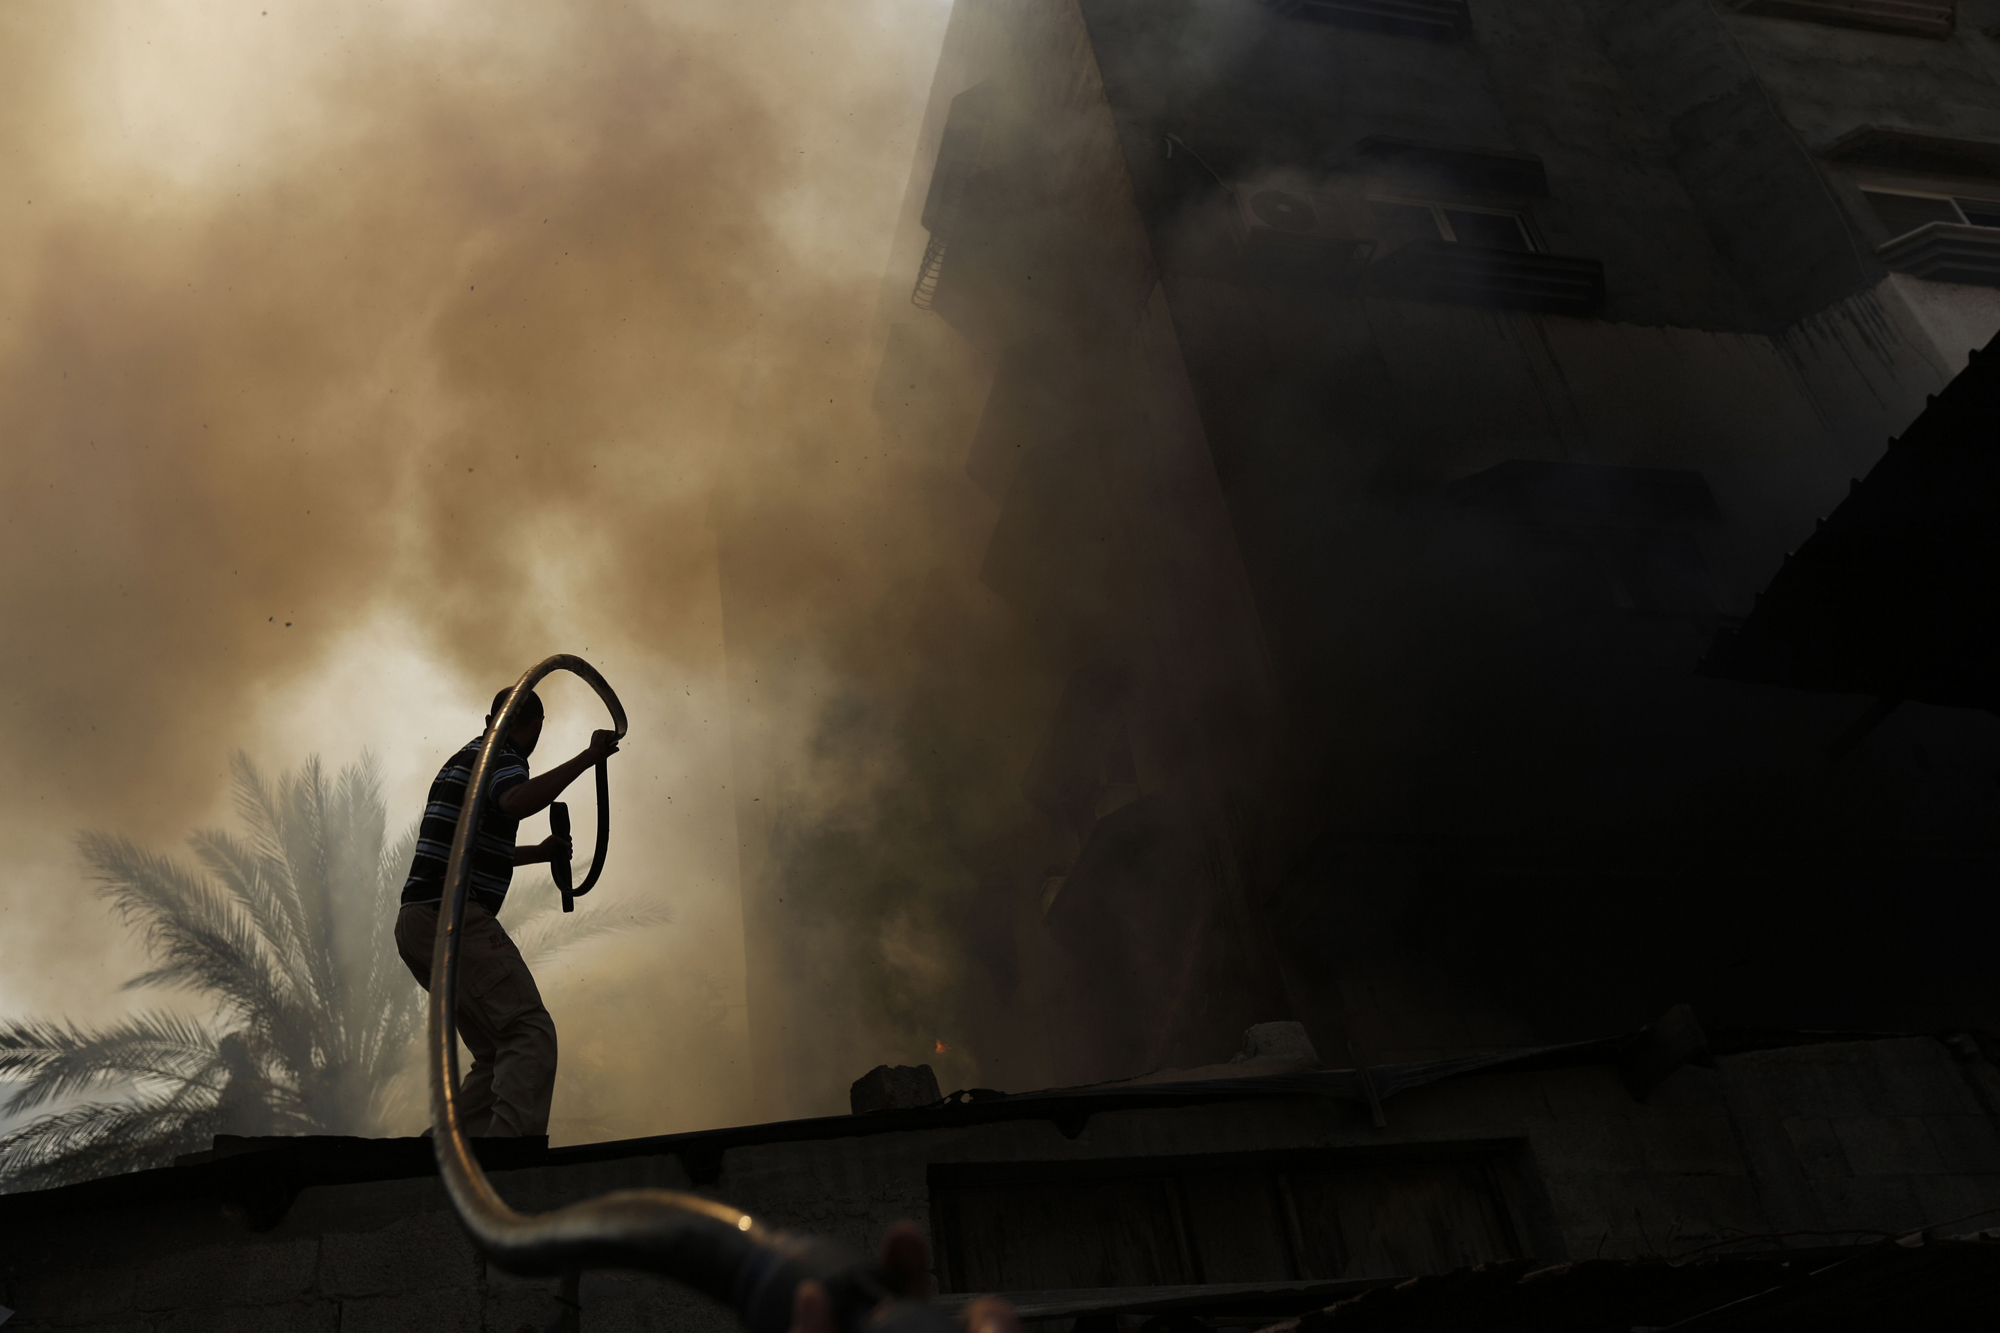 A Palestinian man battles a building on fire following several Israeli strikes on Gaza City on July 30, 2014.